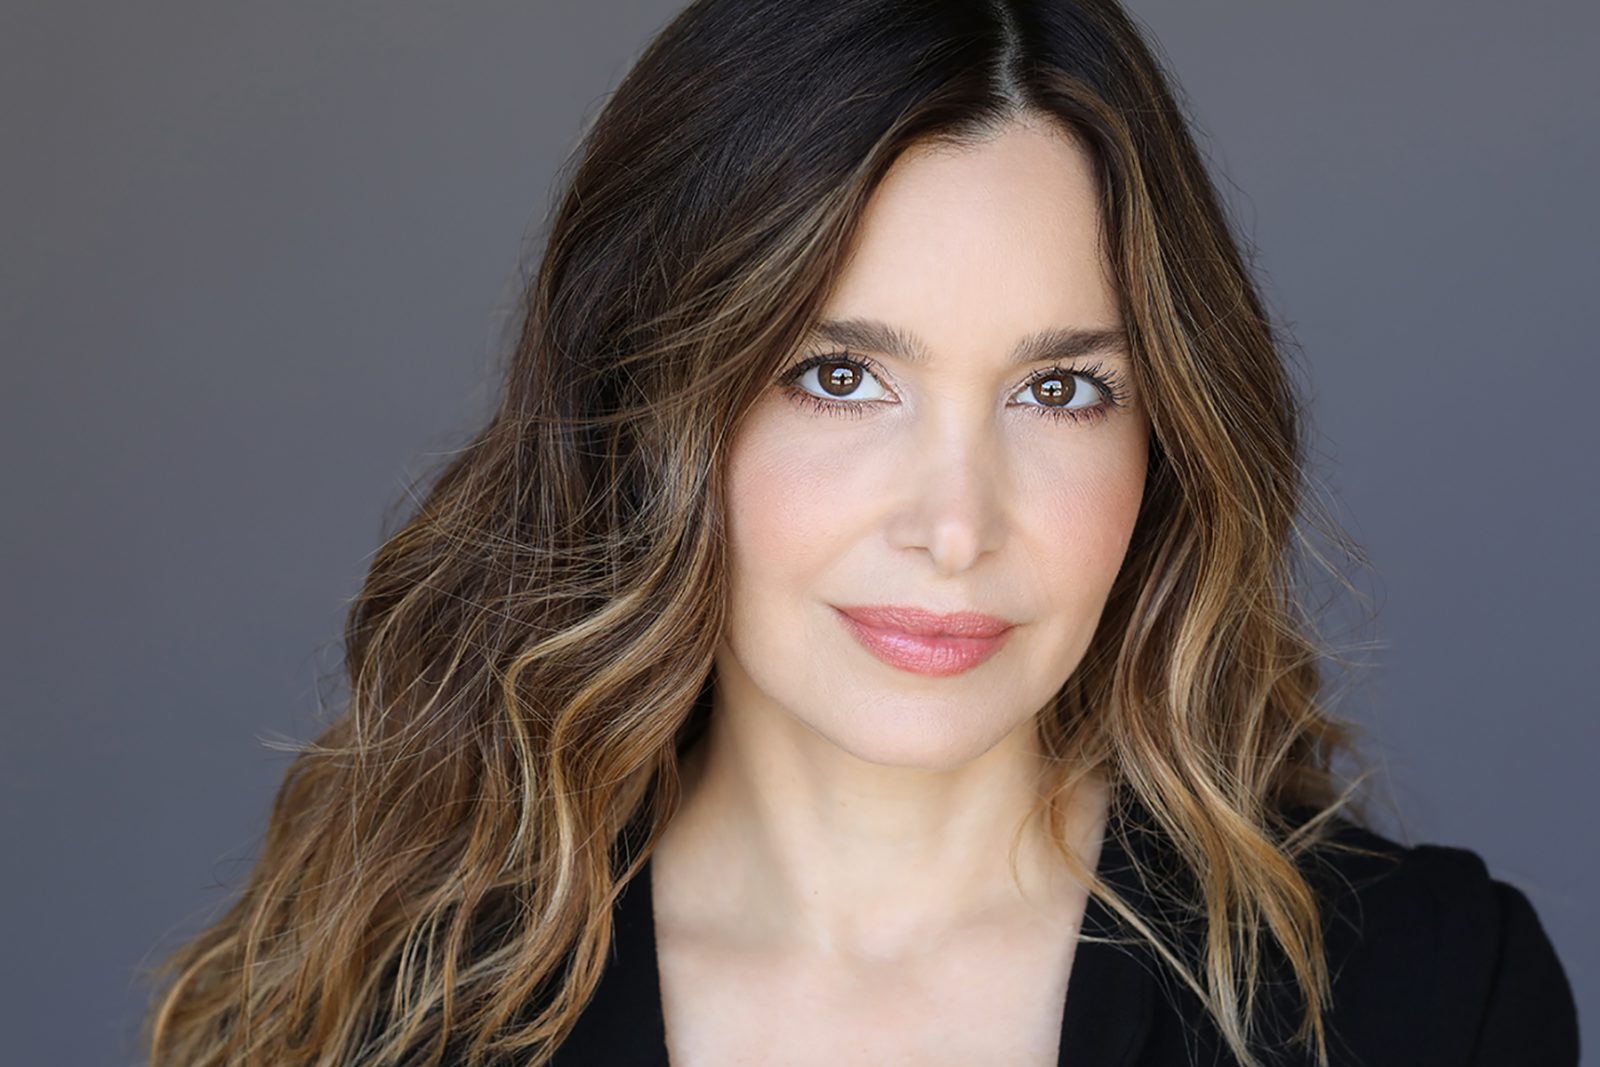 Gina Philips Biography Height Weight Age Movies Husband Family Salary Net Worth Facts More